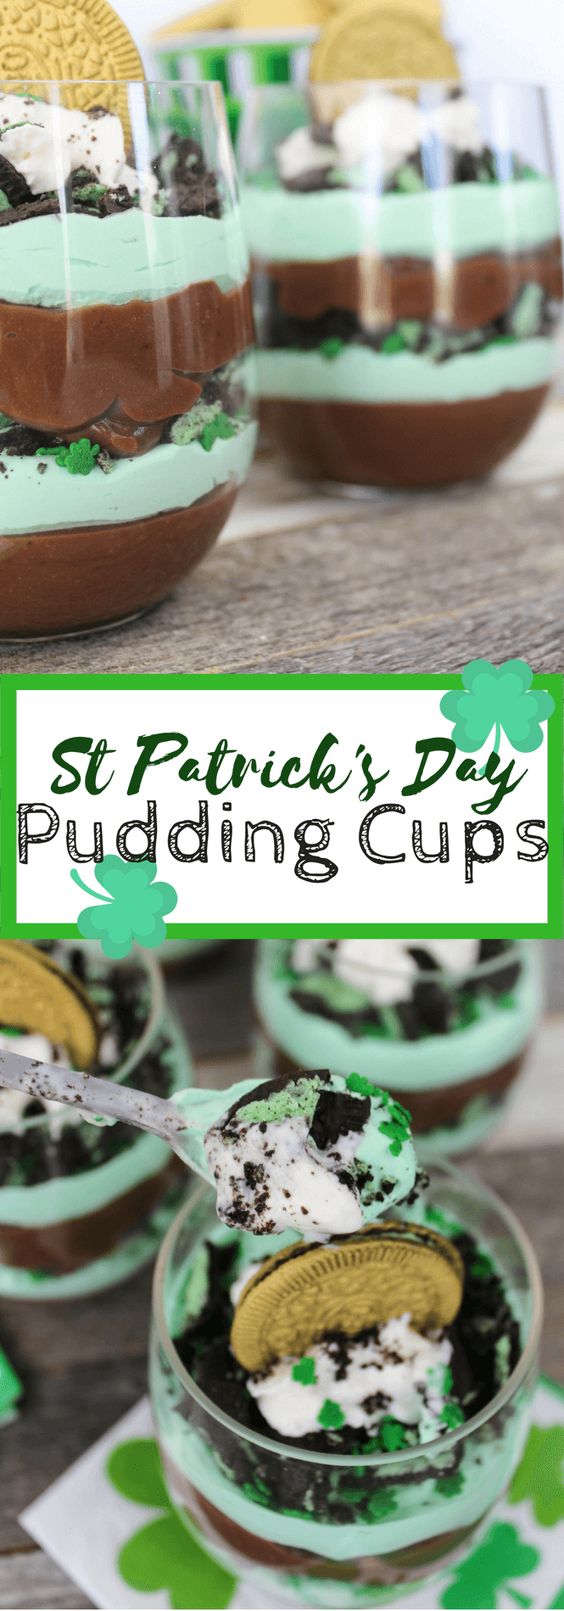 St Patrick’s Day Pudding Cups are made with chocolate instant pudding, mint OREO cookies, sprinkles and whipped cream